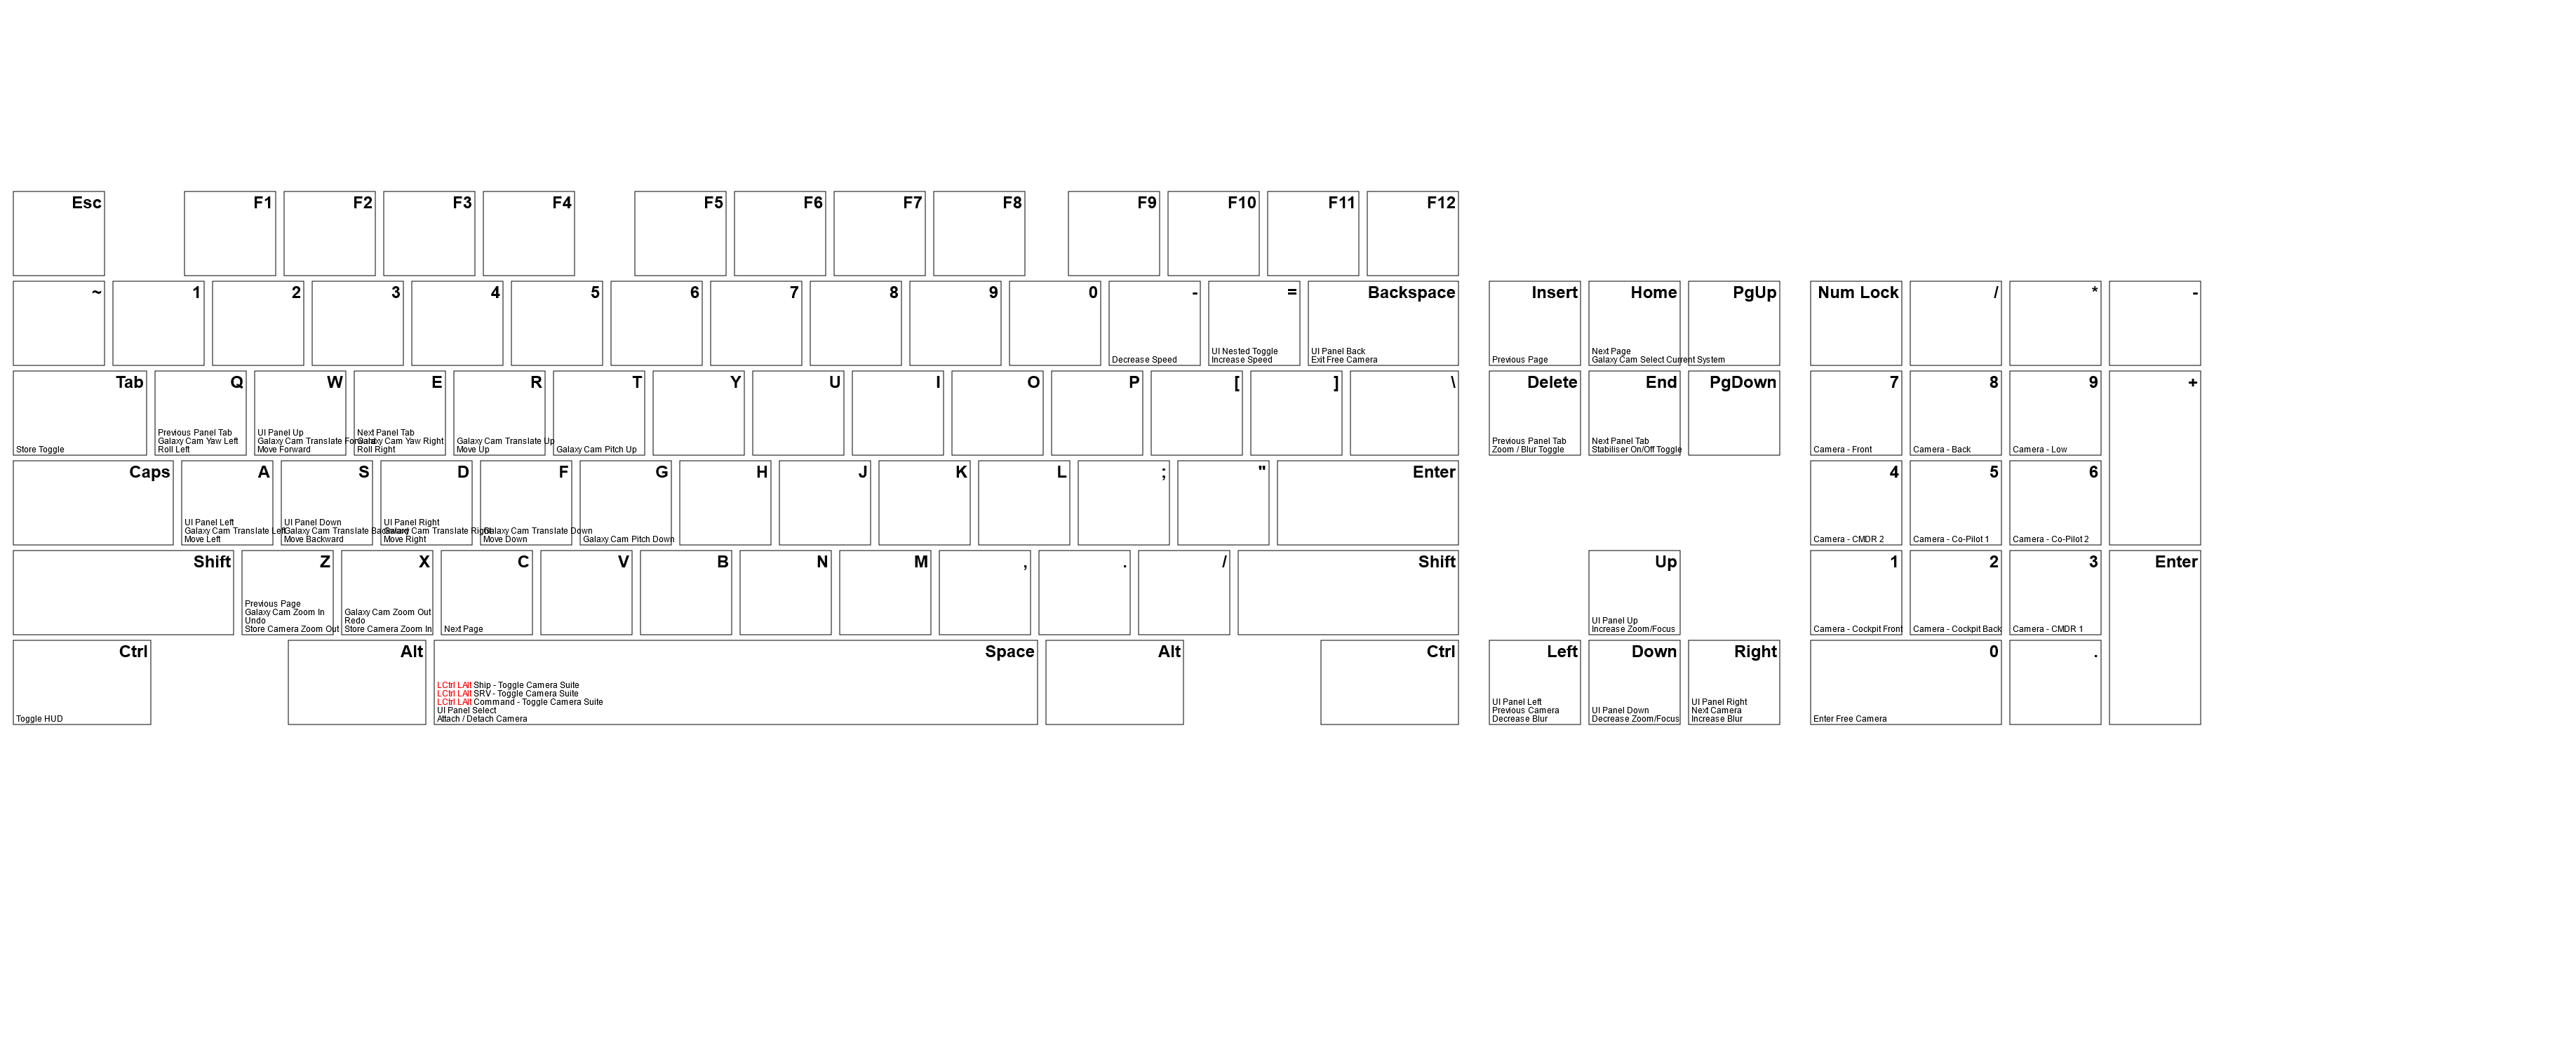 Keyboard layout generated by EDRefKB